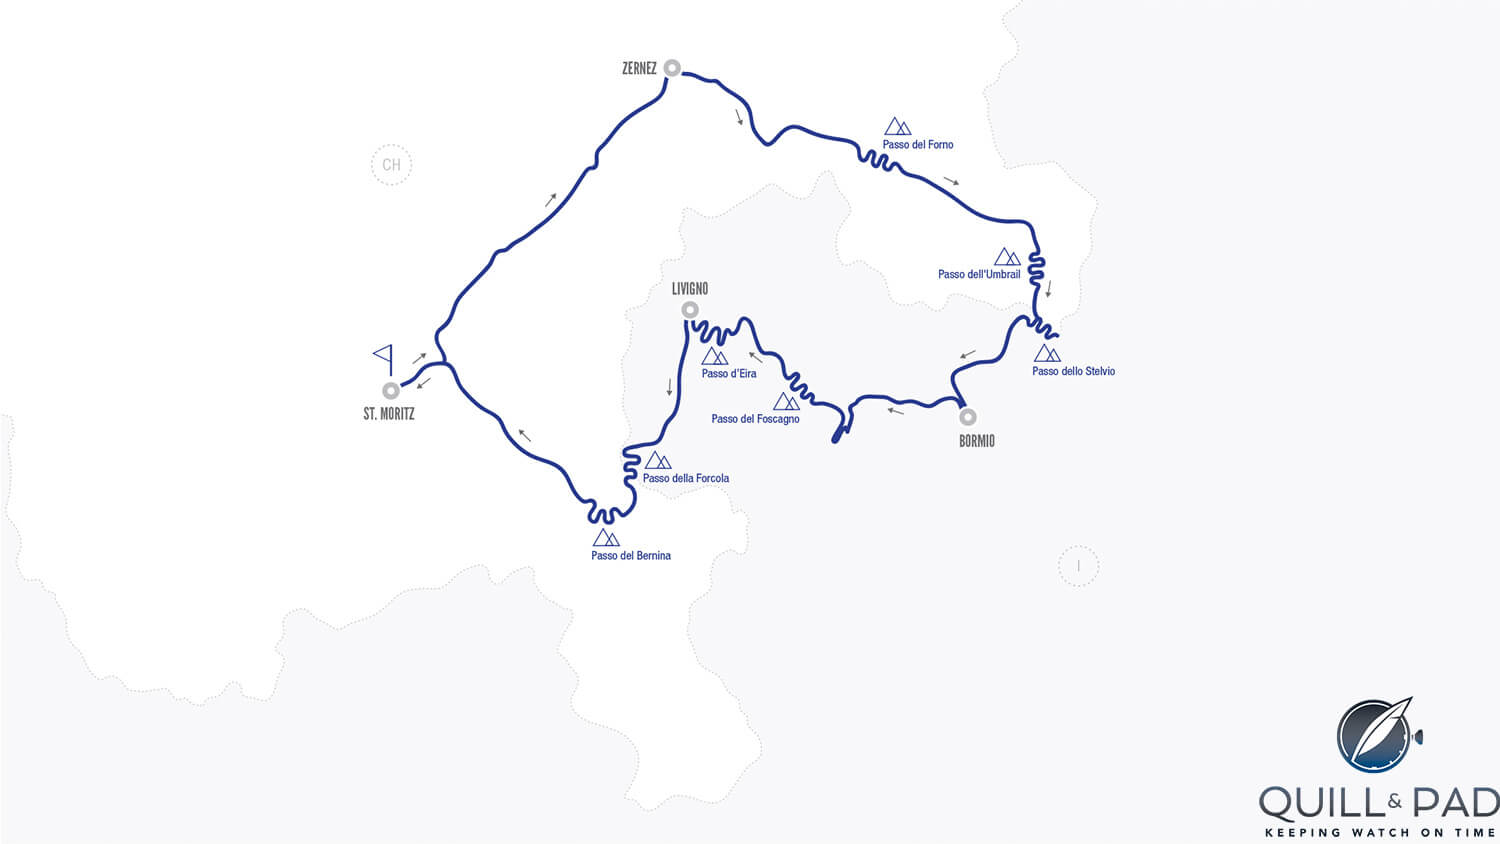 Route of the 2017 Passione Engadina rally in the Alps from St. Moritz, Switzerland to Bormio, Italy and back (the white area is Switzerland, shaded area is Italy)